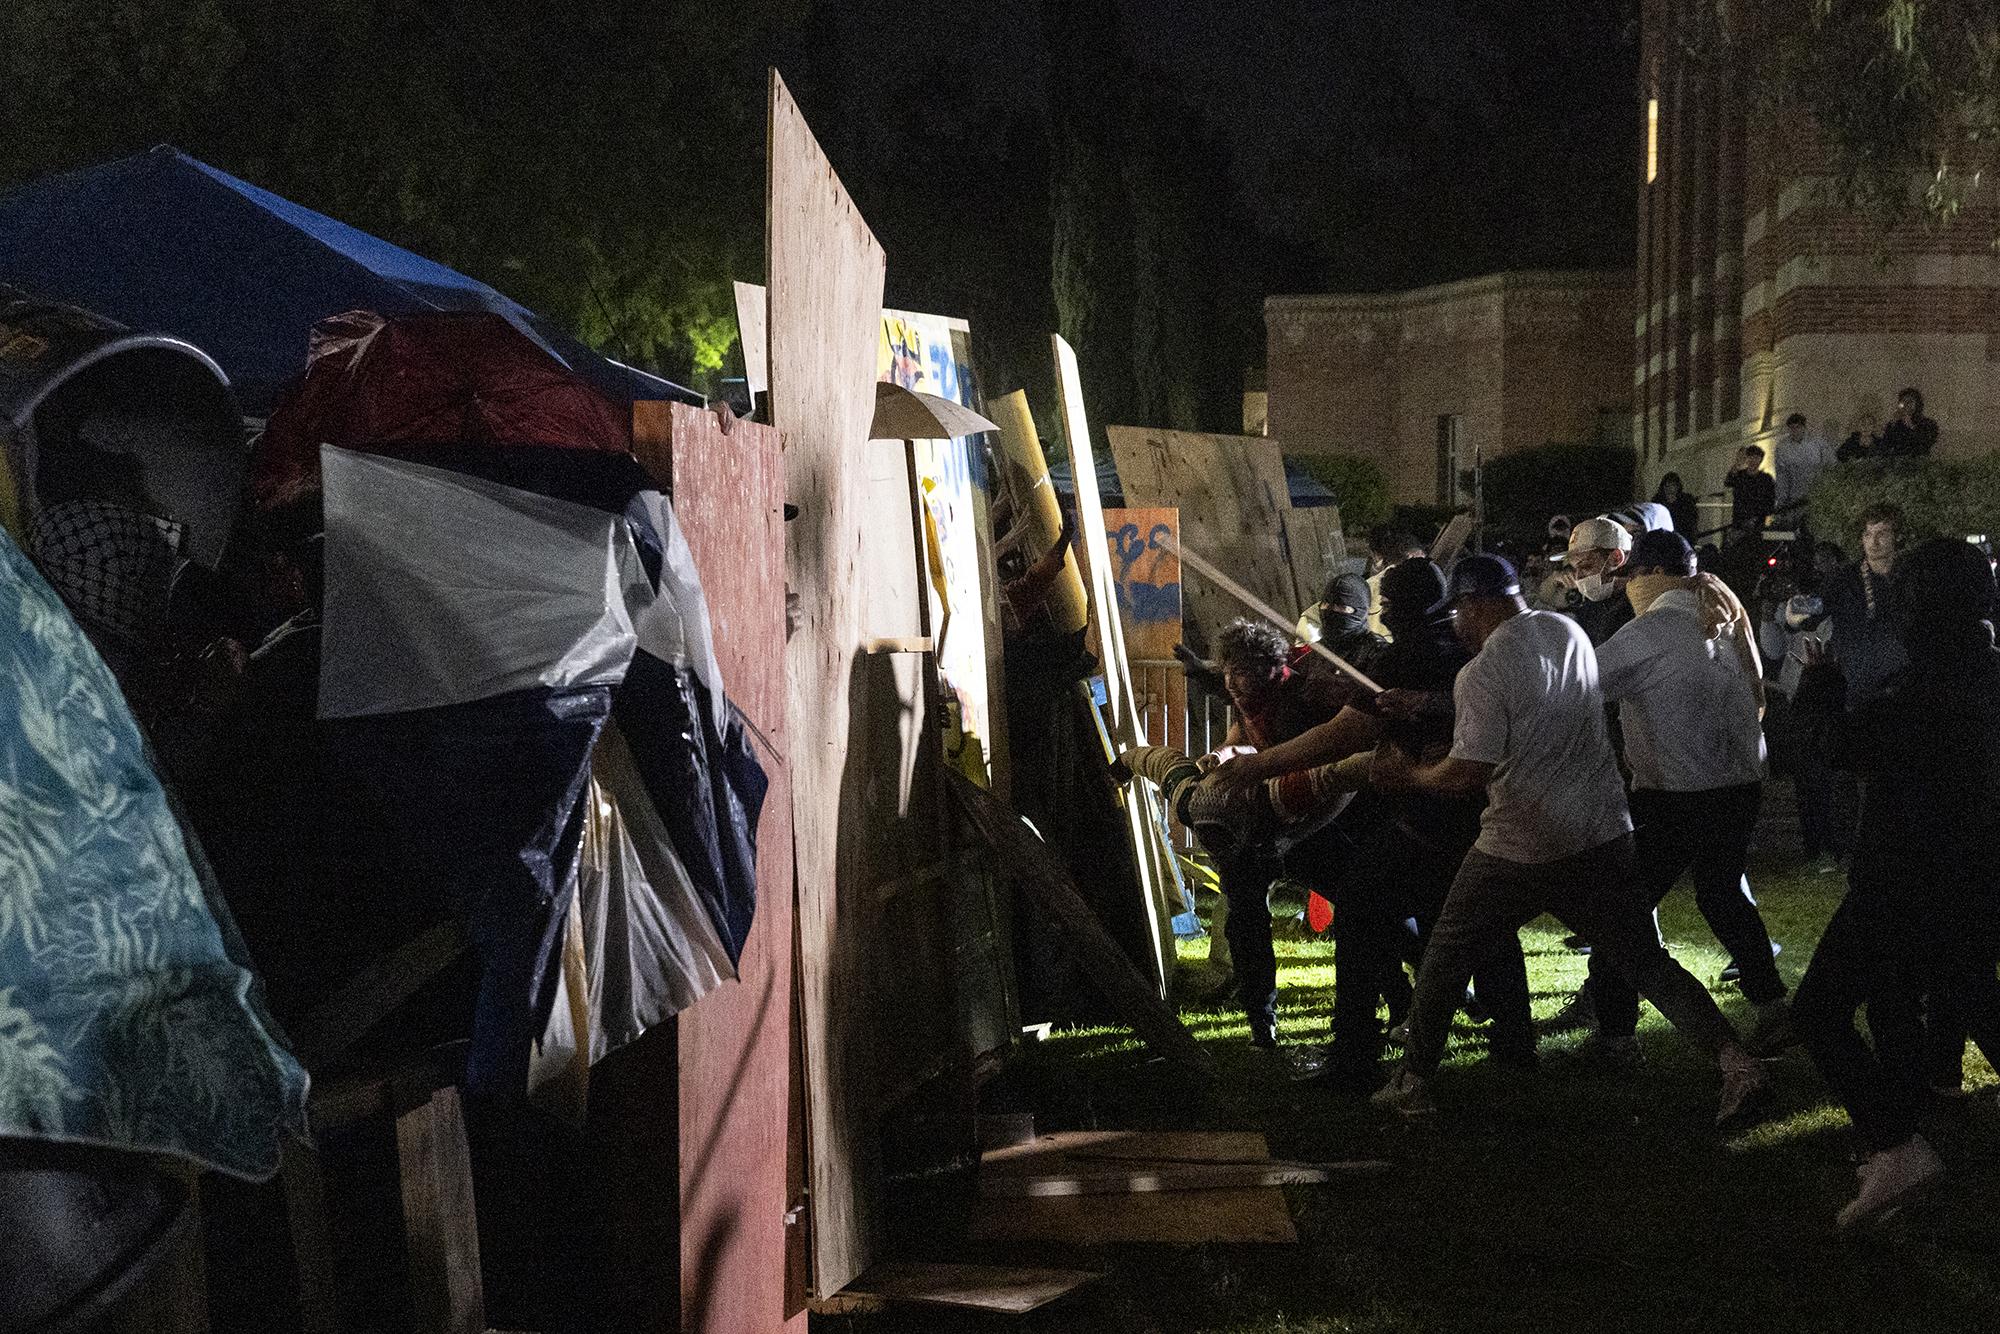 Counter protesters confront a pro-Palestinian encampment set up on the campus of the University of California Los Angeles (UCLA) as clashes erupt, in Los Angeles on May 1.